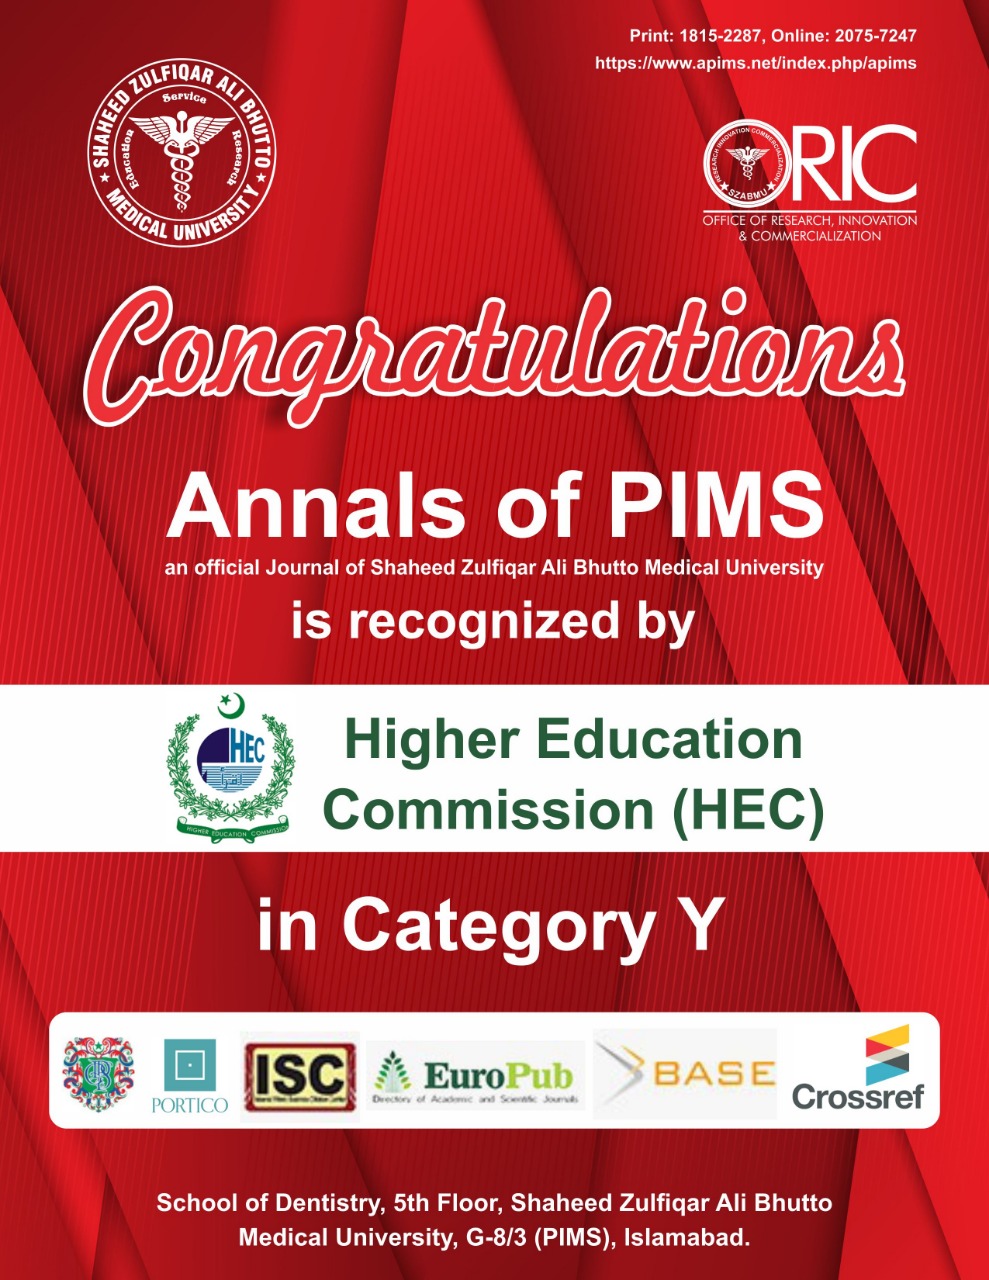 Annals of PIMS an official Journal of SZABMU is recognized by HEC in Category Y